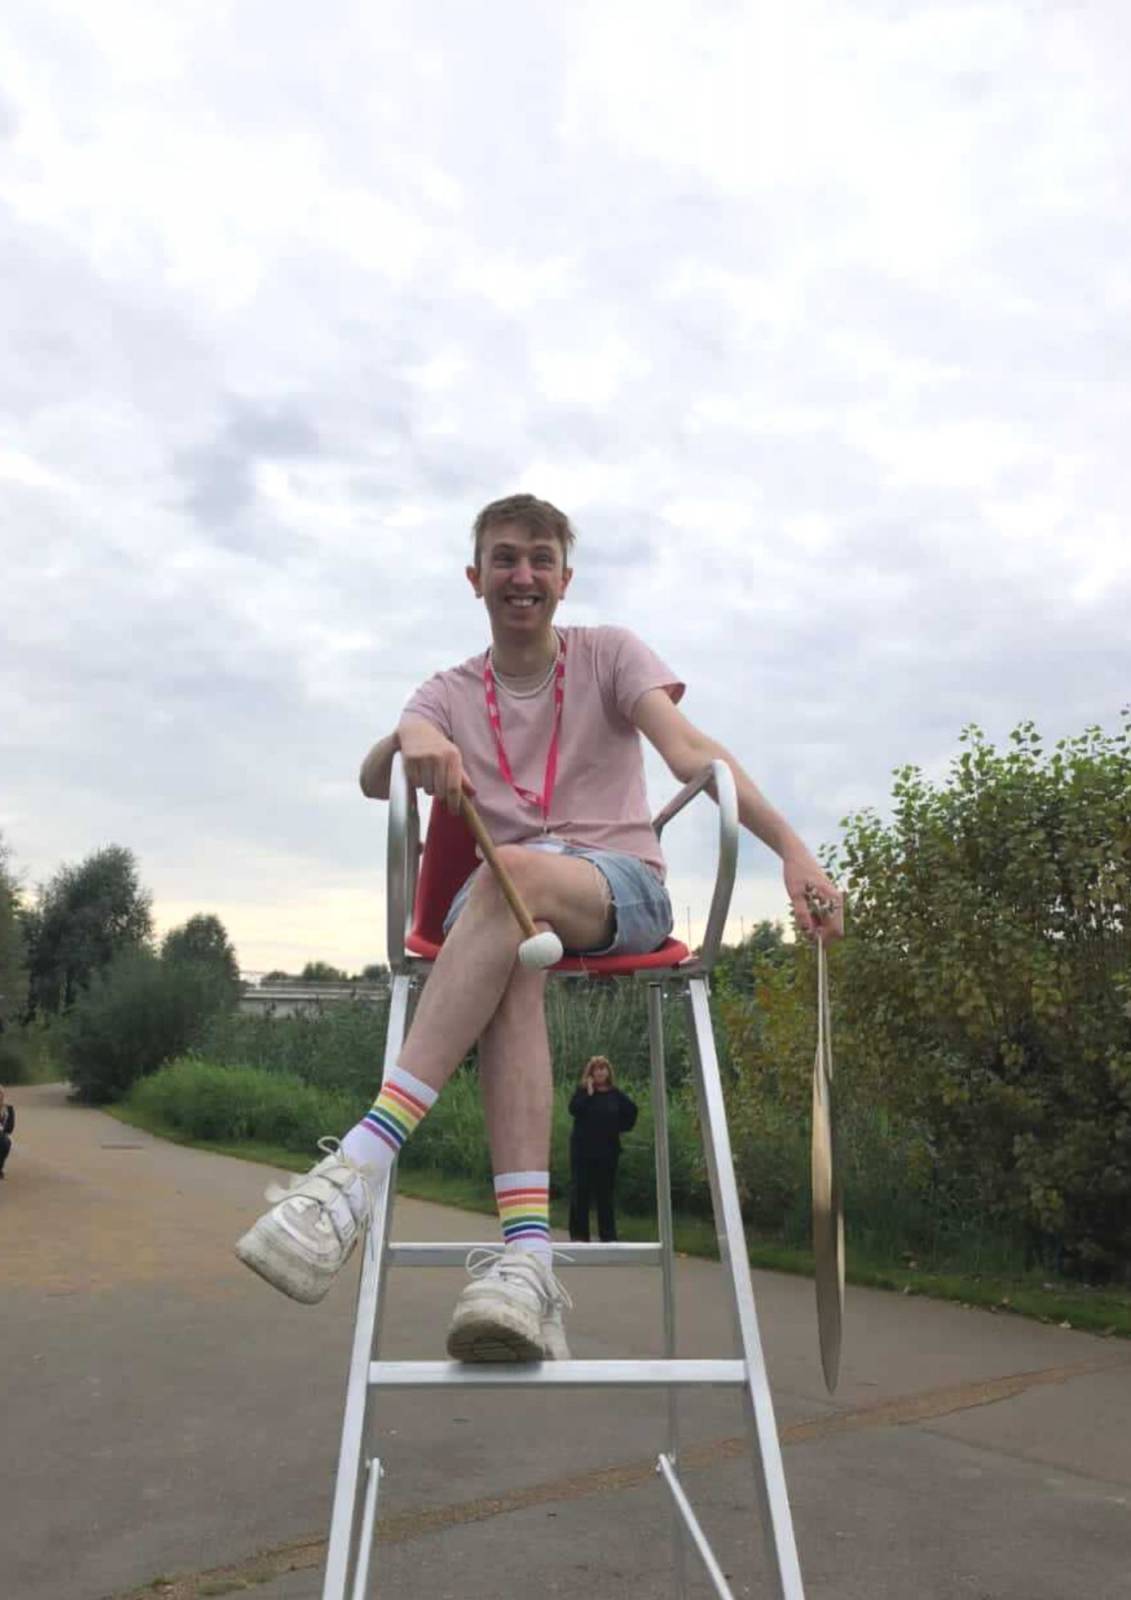 Aidan, who wears a pink t-shirt, denim shorts, rainbow coloured socks and white trainers, sits on a tall umpire's chair and laughs.